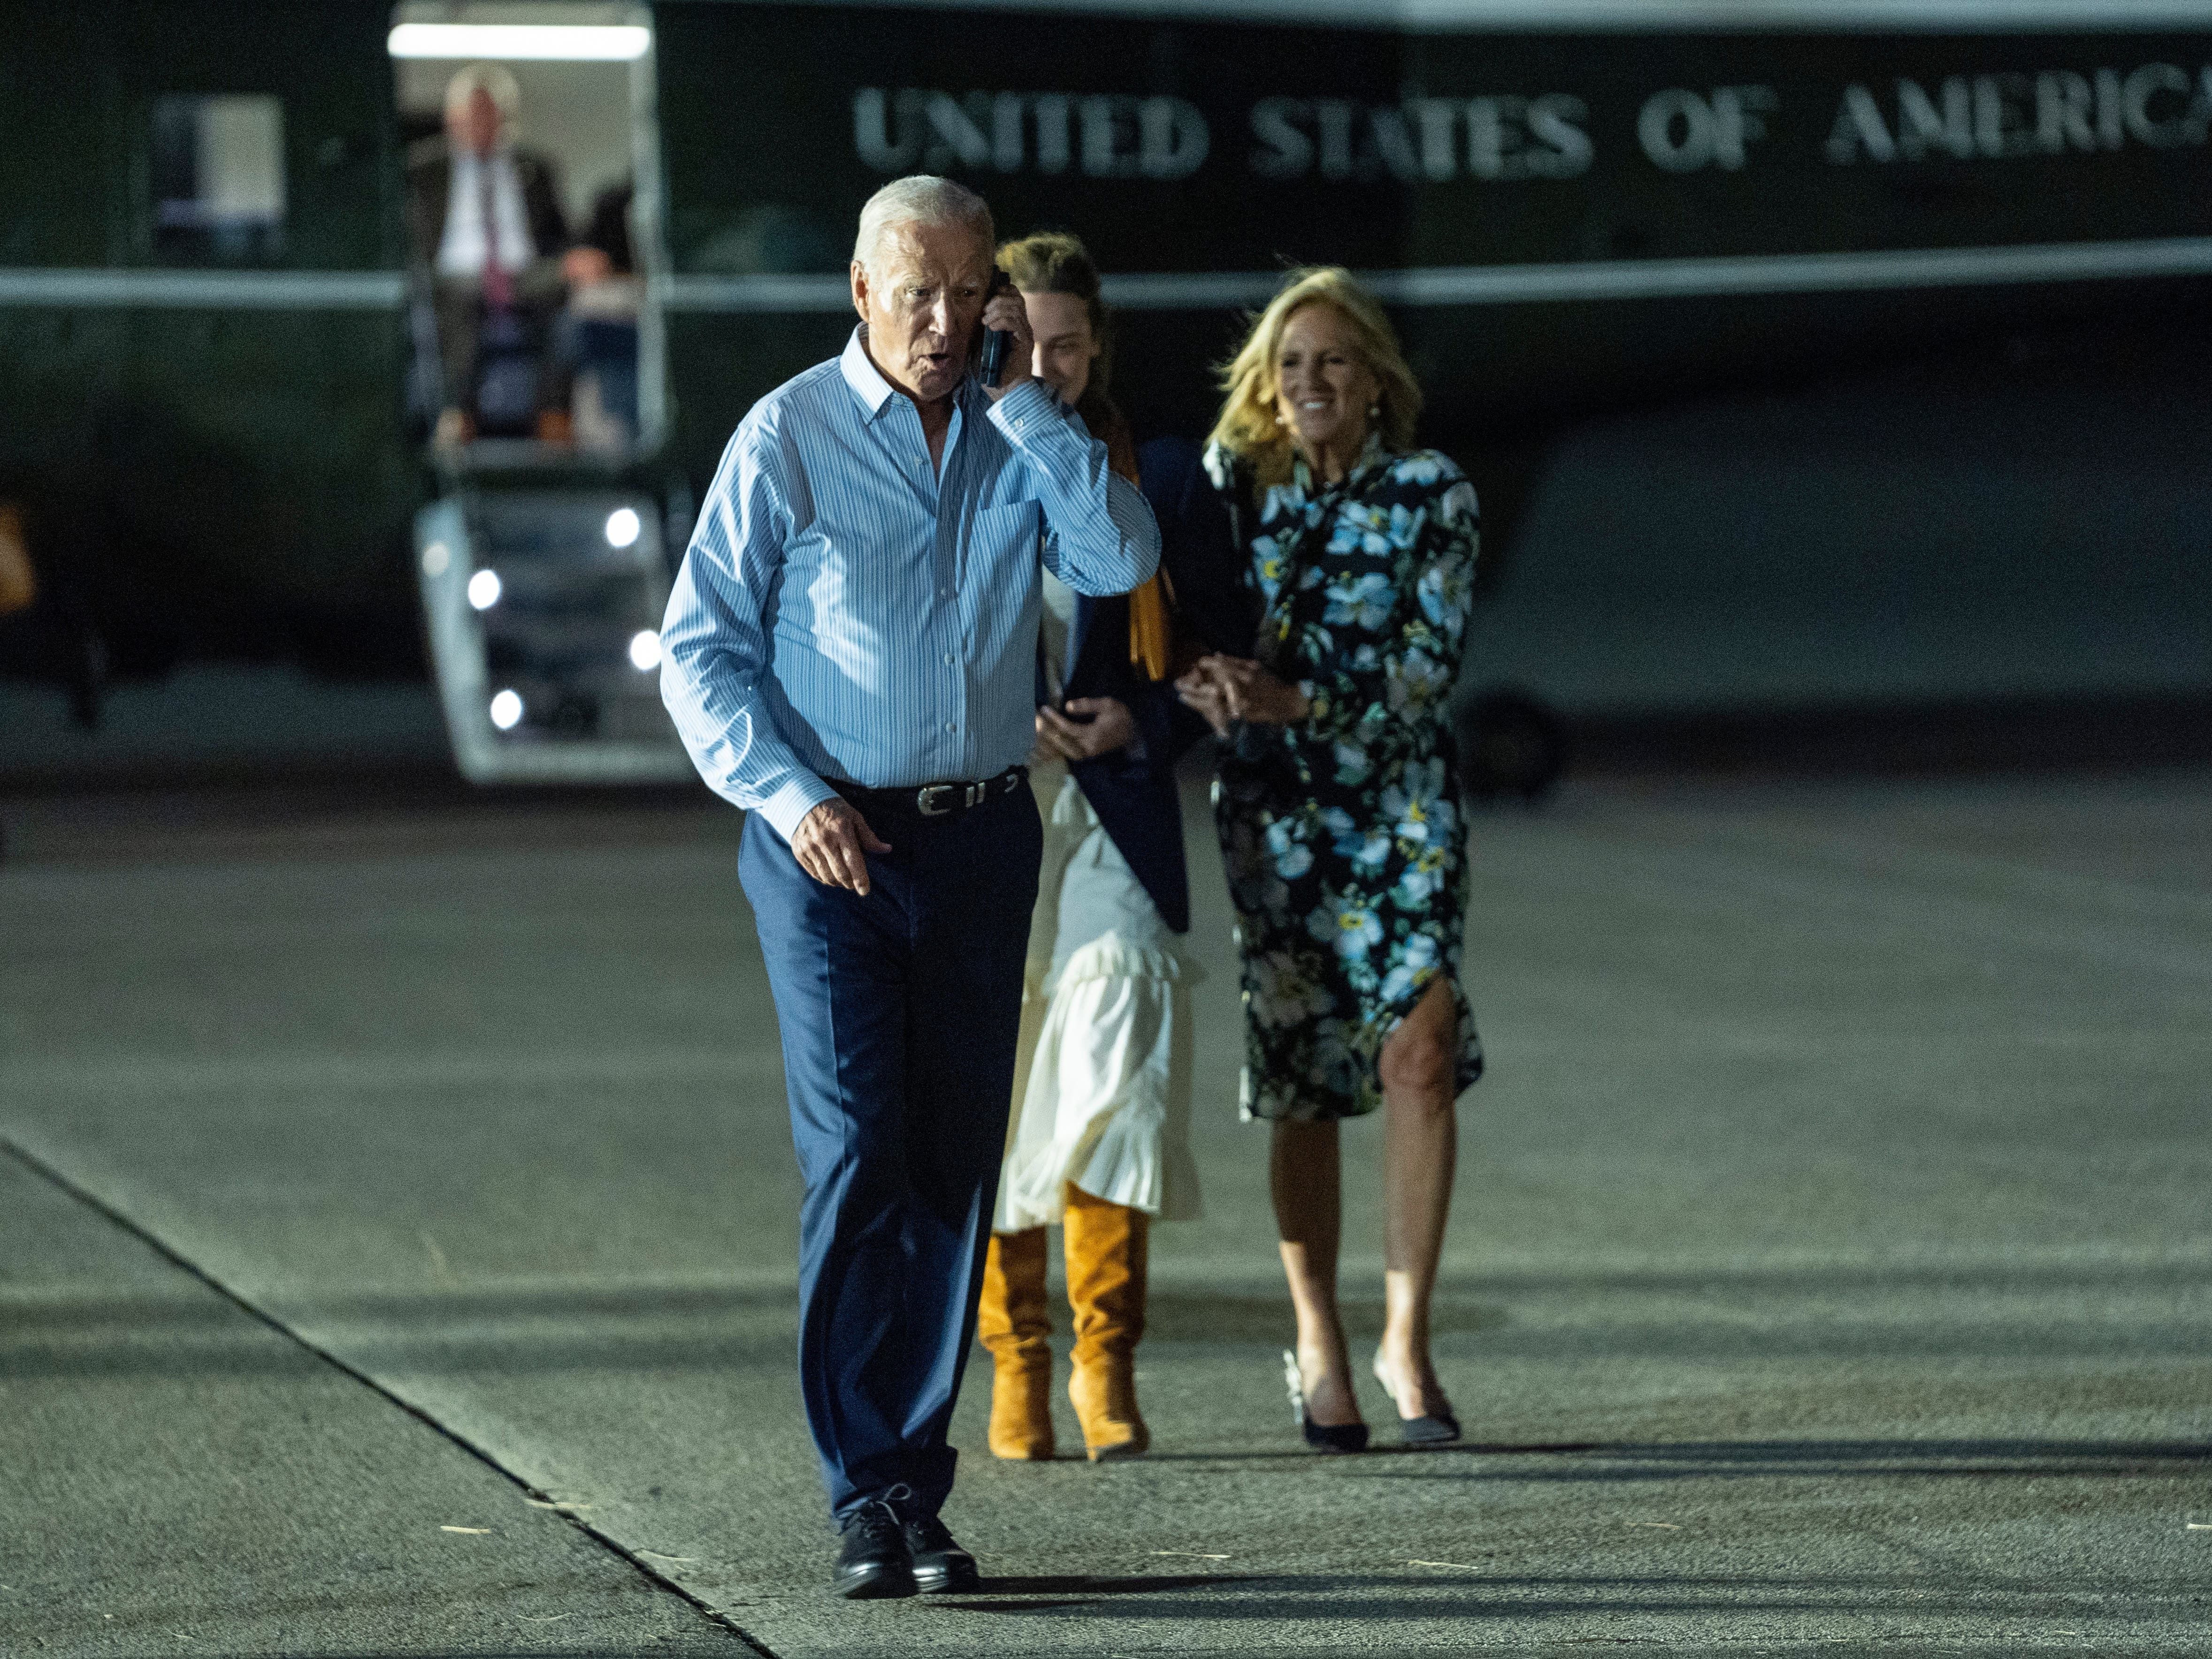 Joe Biden’s family tells him to stay in the presidential race and keep fighting